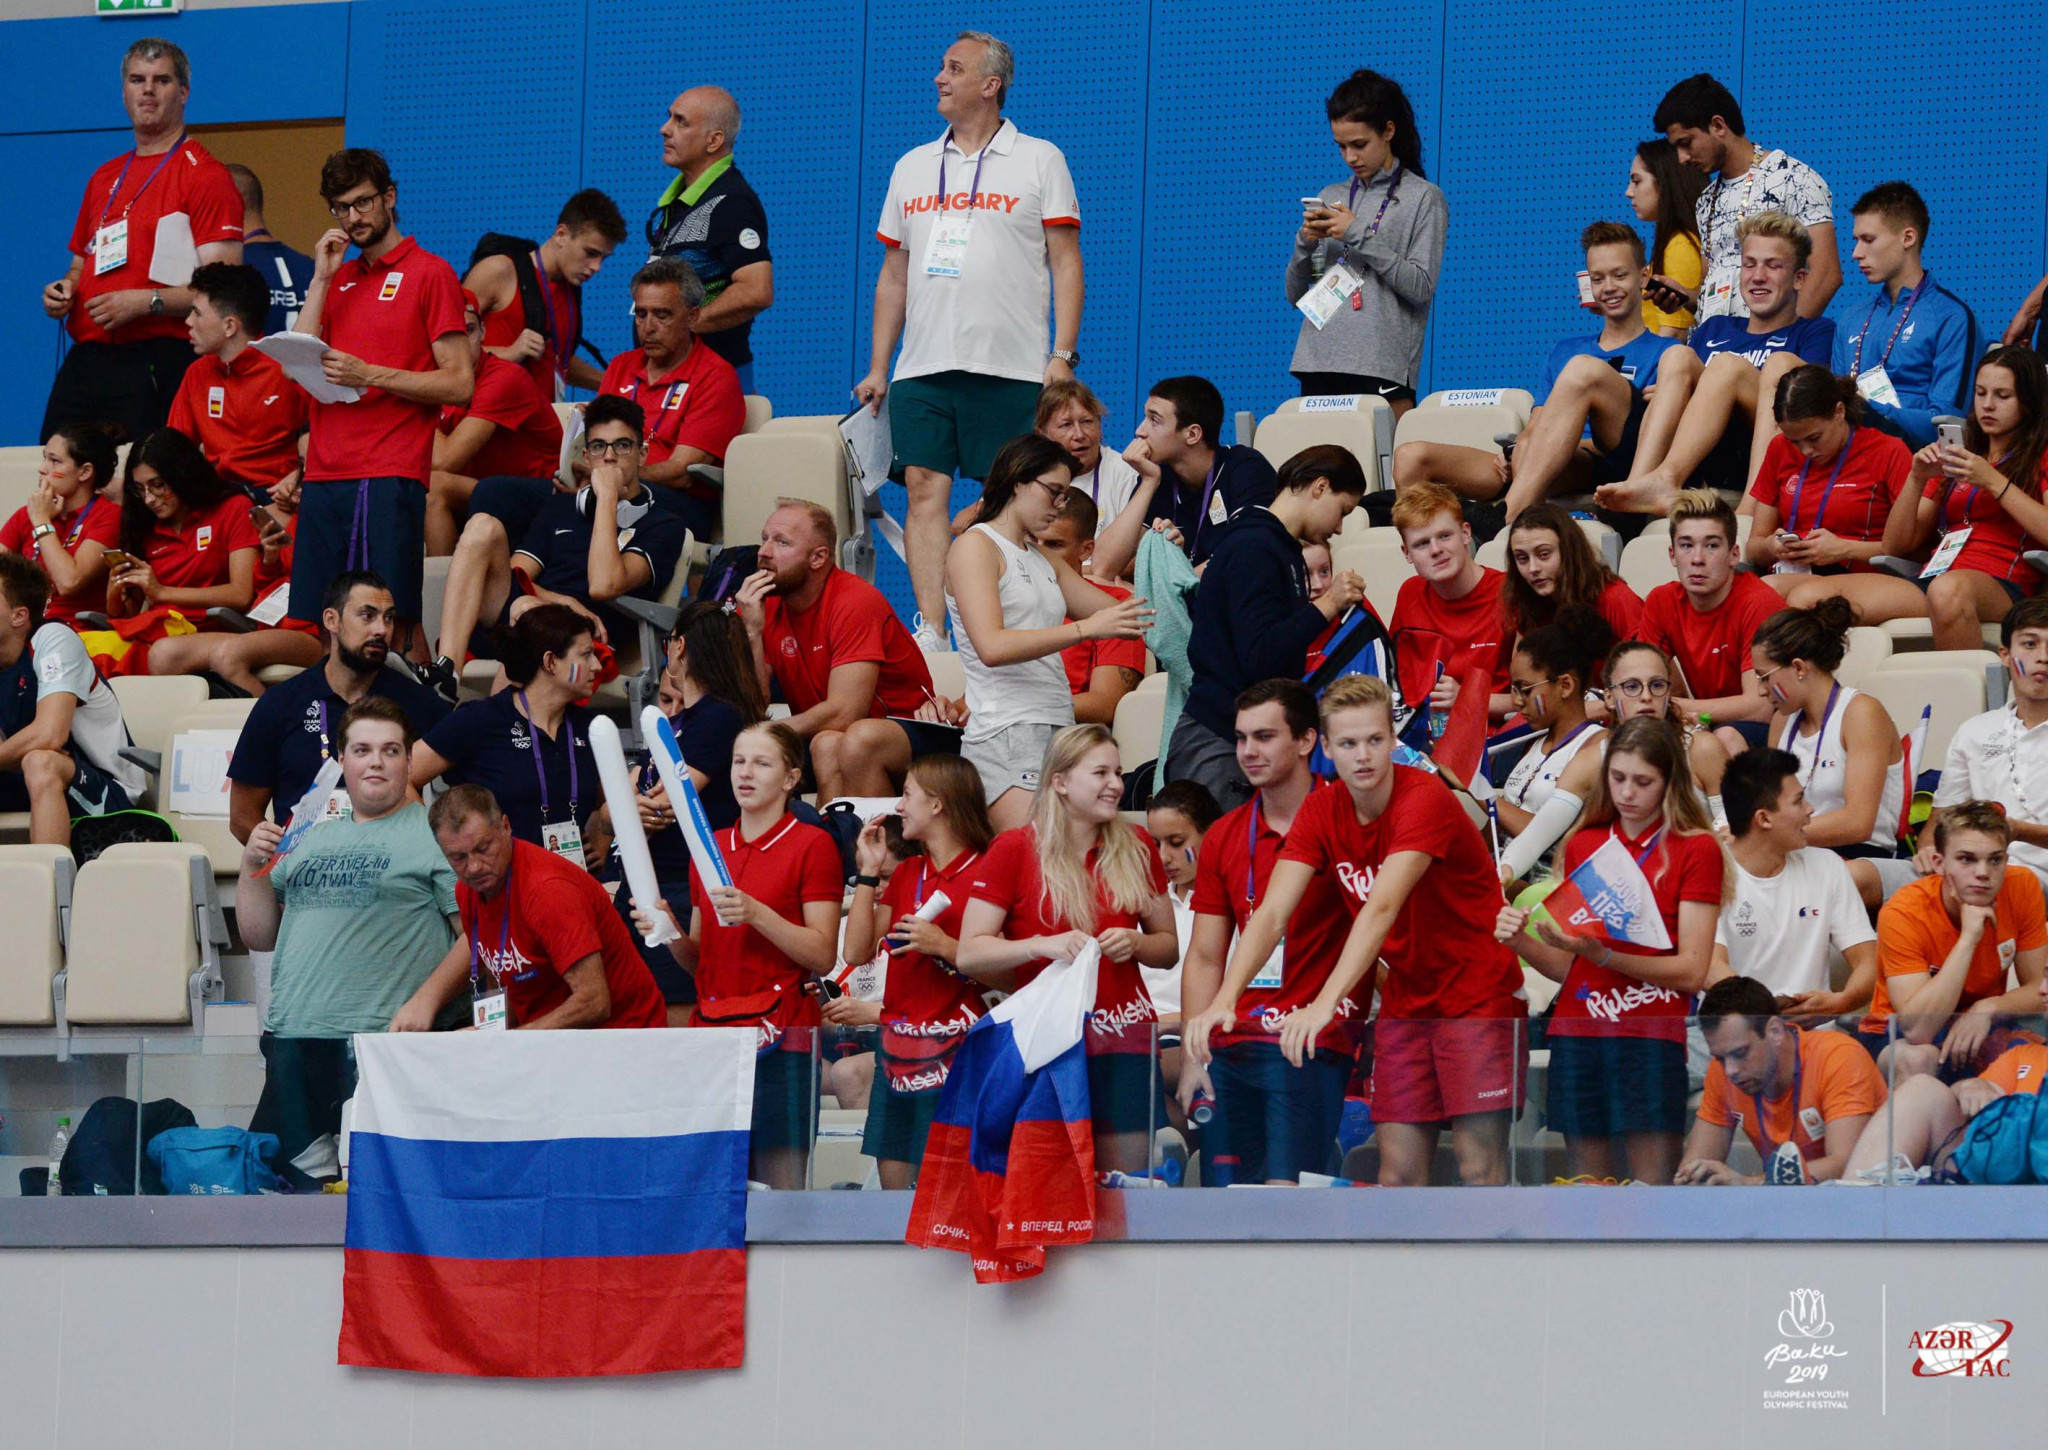 Russia replace hosts Azerbaijan at top of Summer EYOF medals table